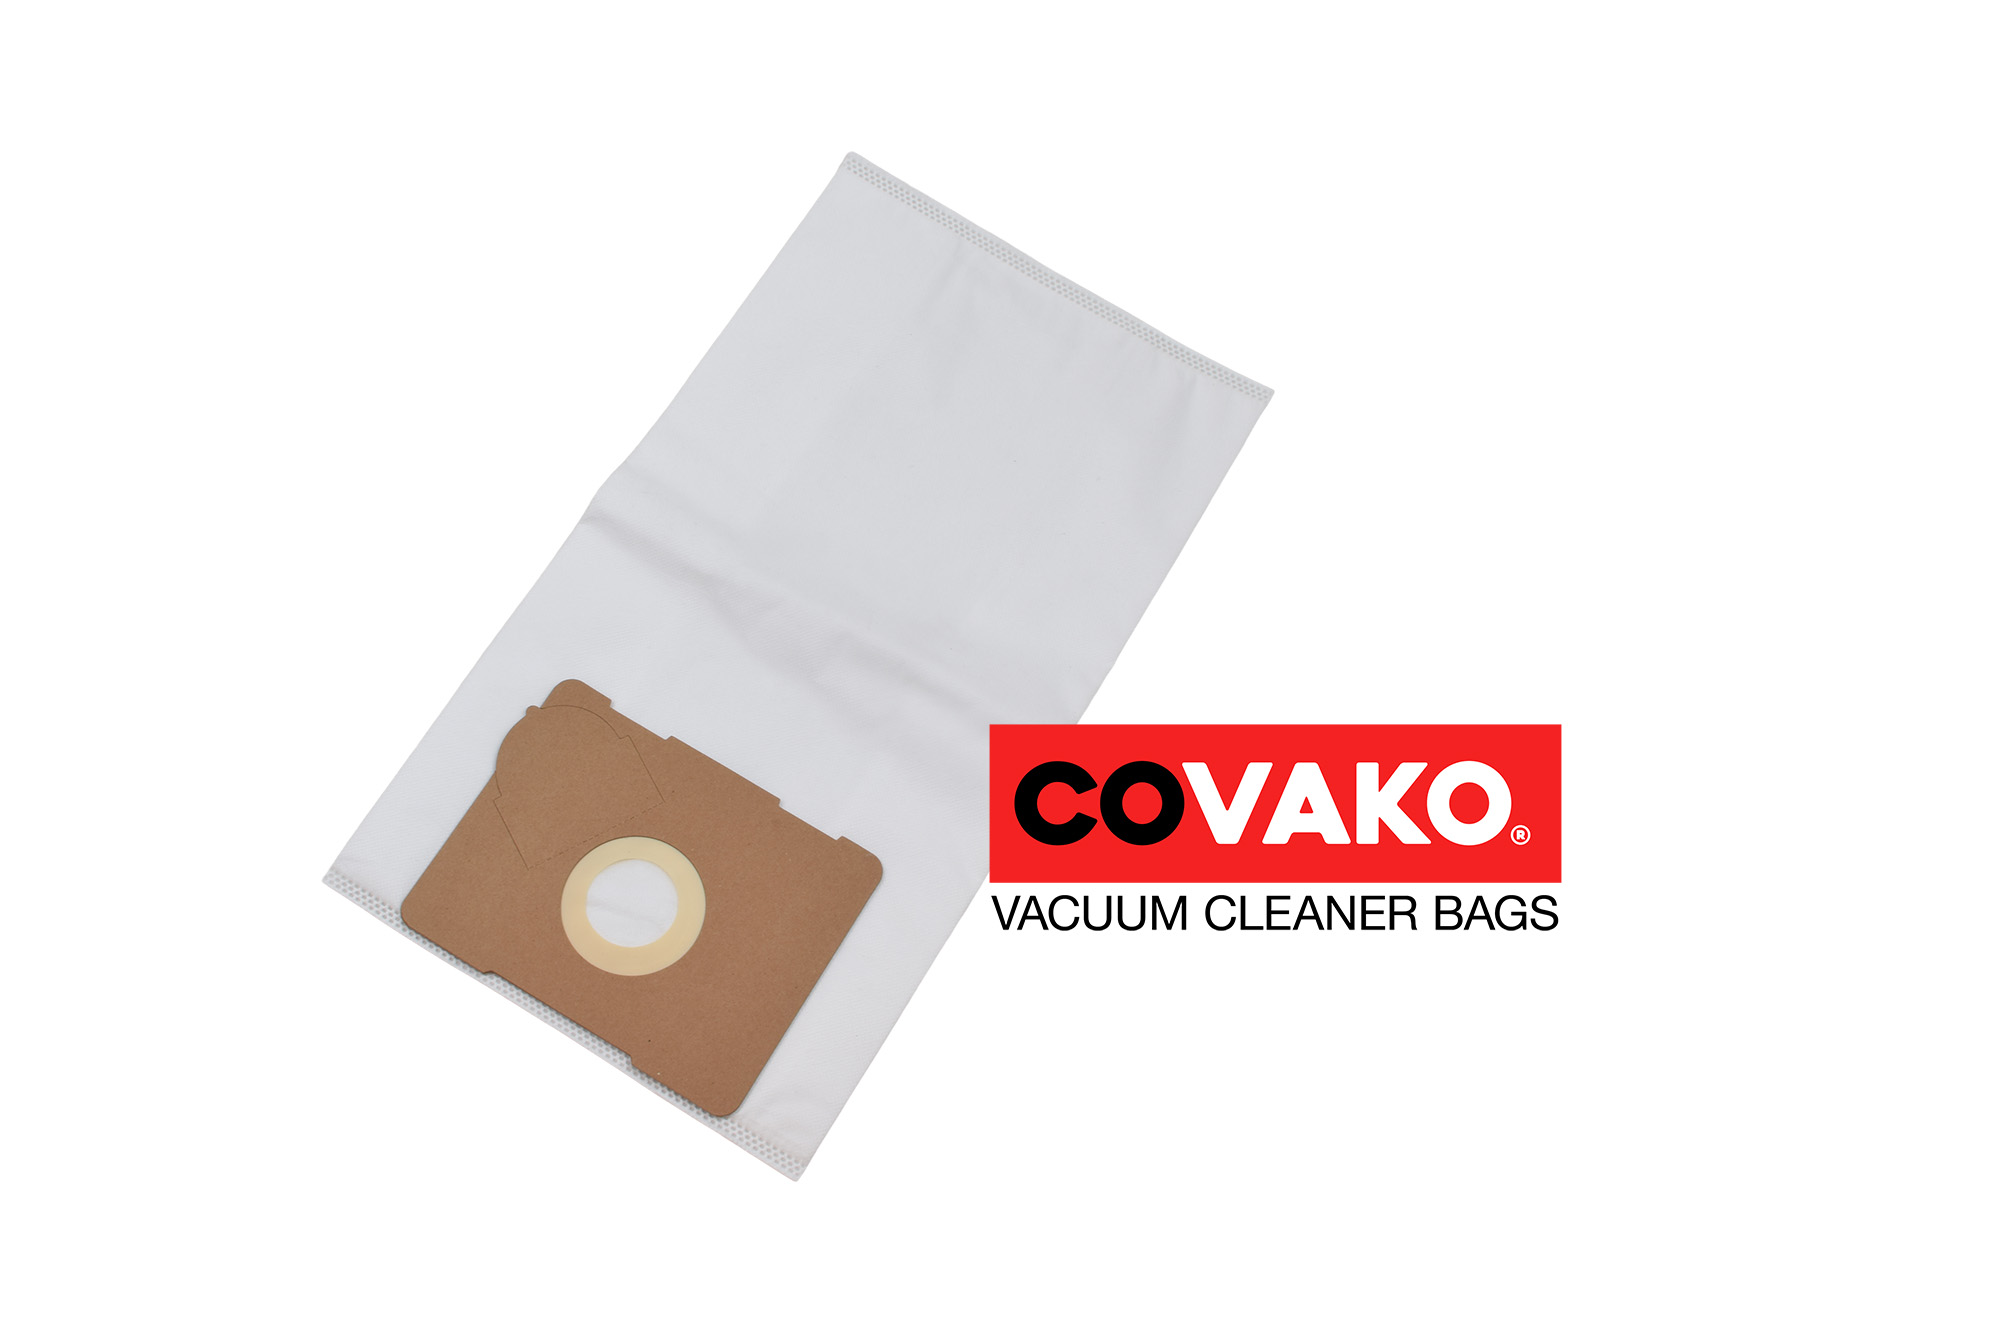 Protool VCP 170 / Synthesis - Protool vacuum cleaner bags